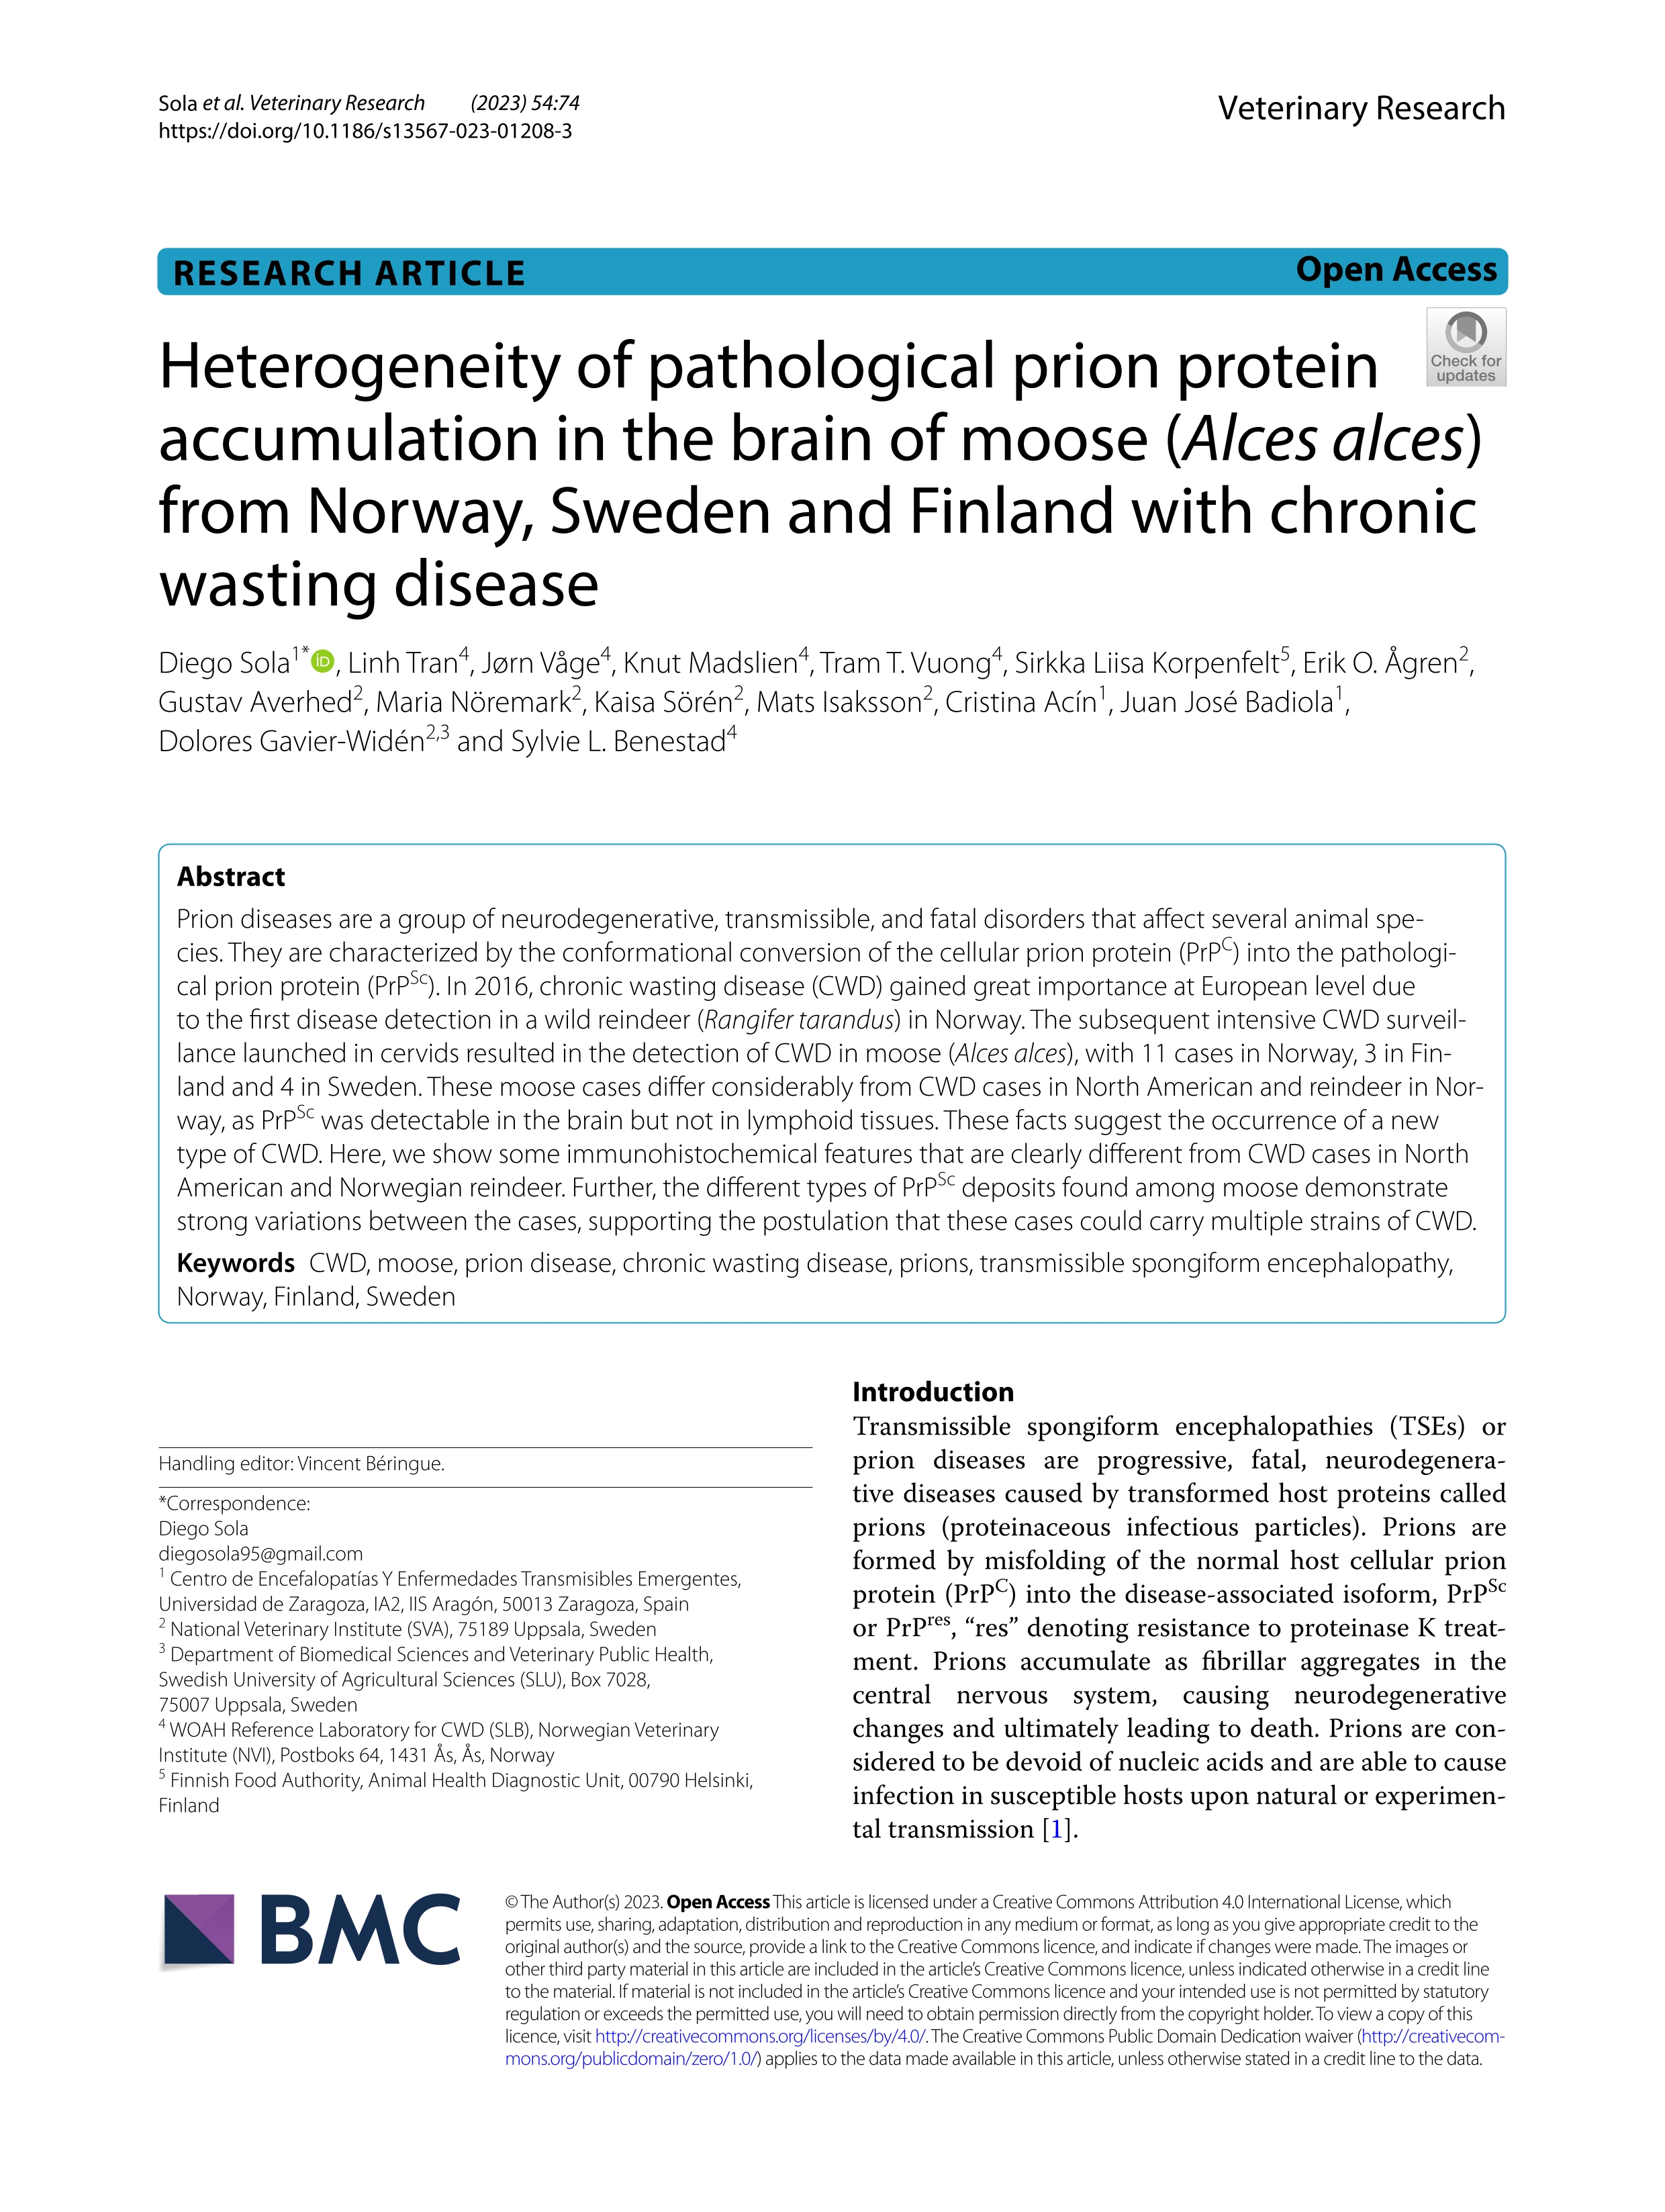 Heterogeneity of pathological prion protein accumulation in the brain of moose (Alces alces) from Norway, Sweden and Finland with chronic wasting disease